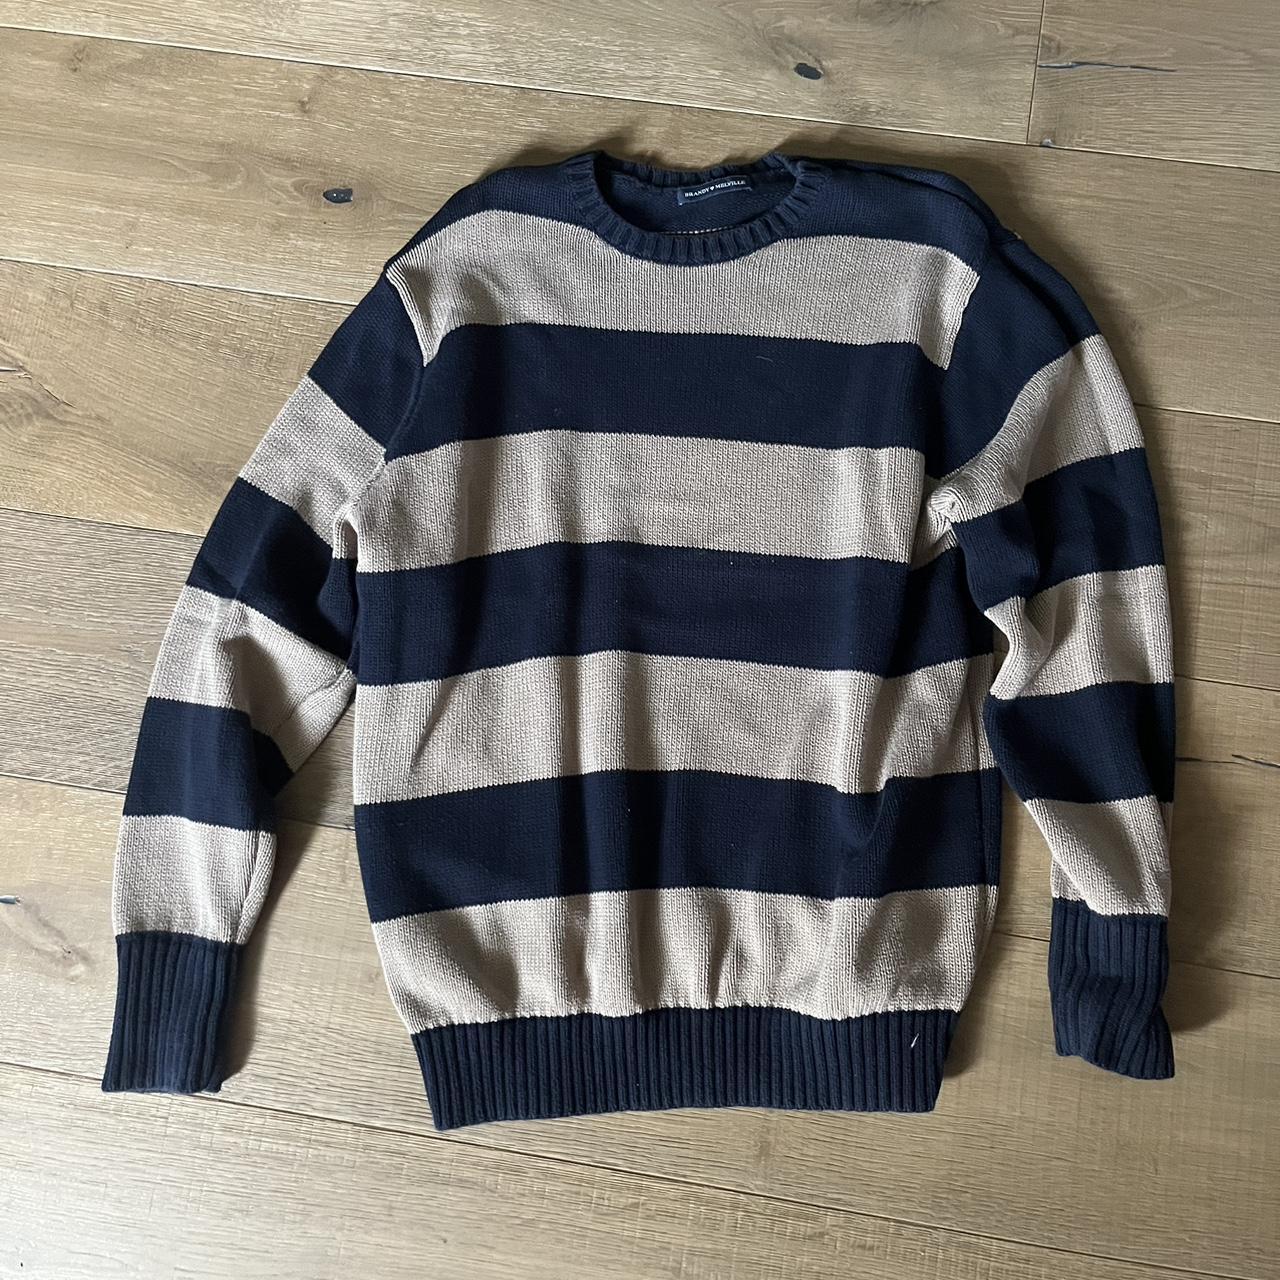 Brandy Melville tate sweater! ★ Only worn once no... - Depop